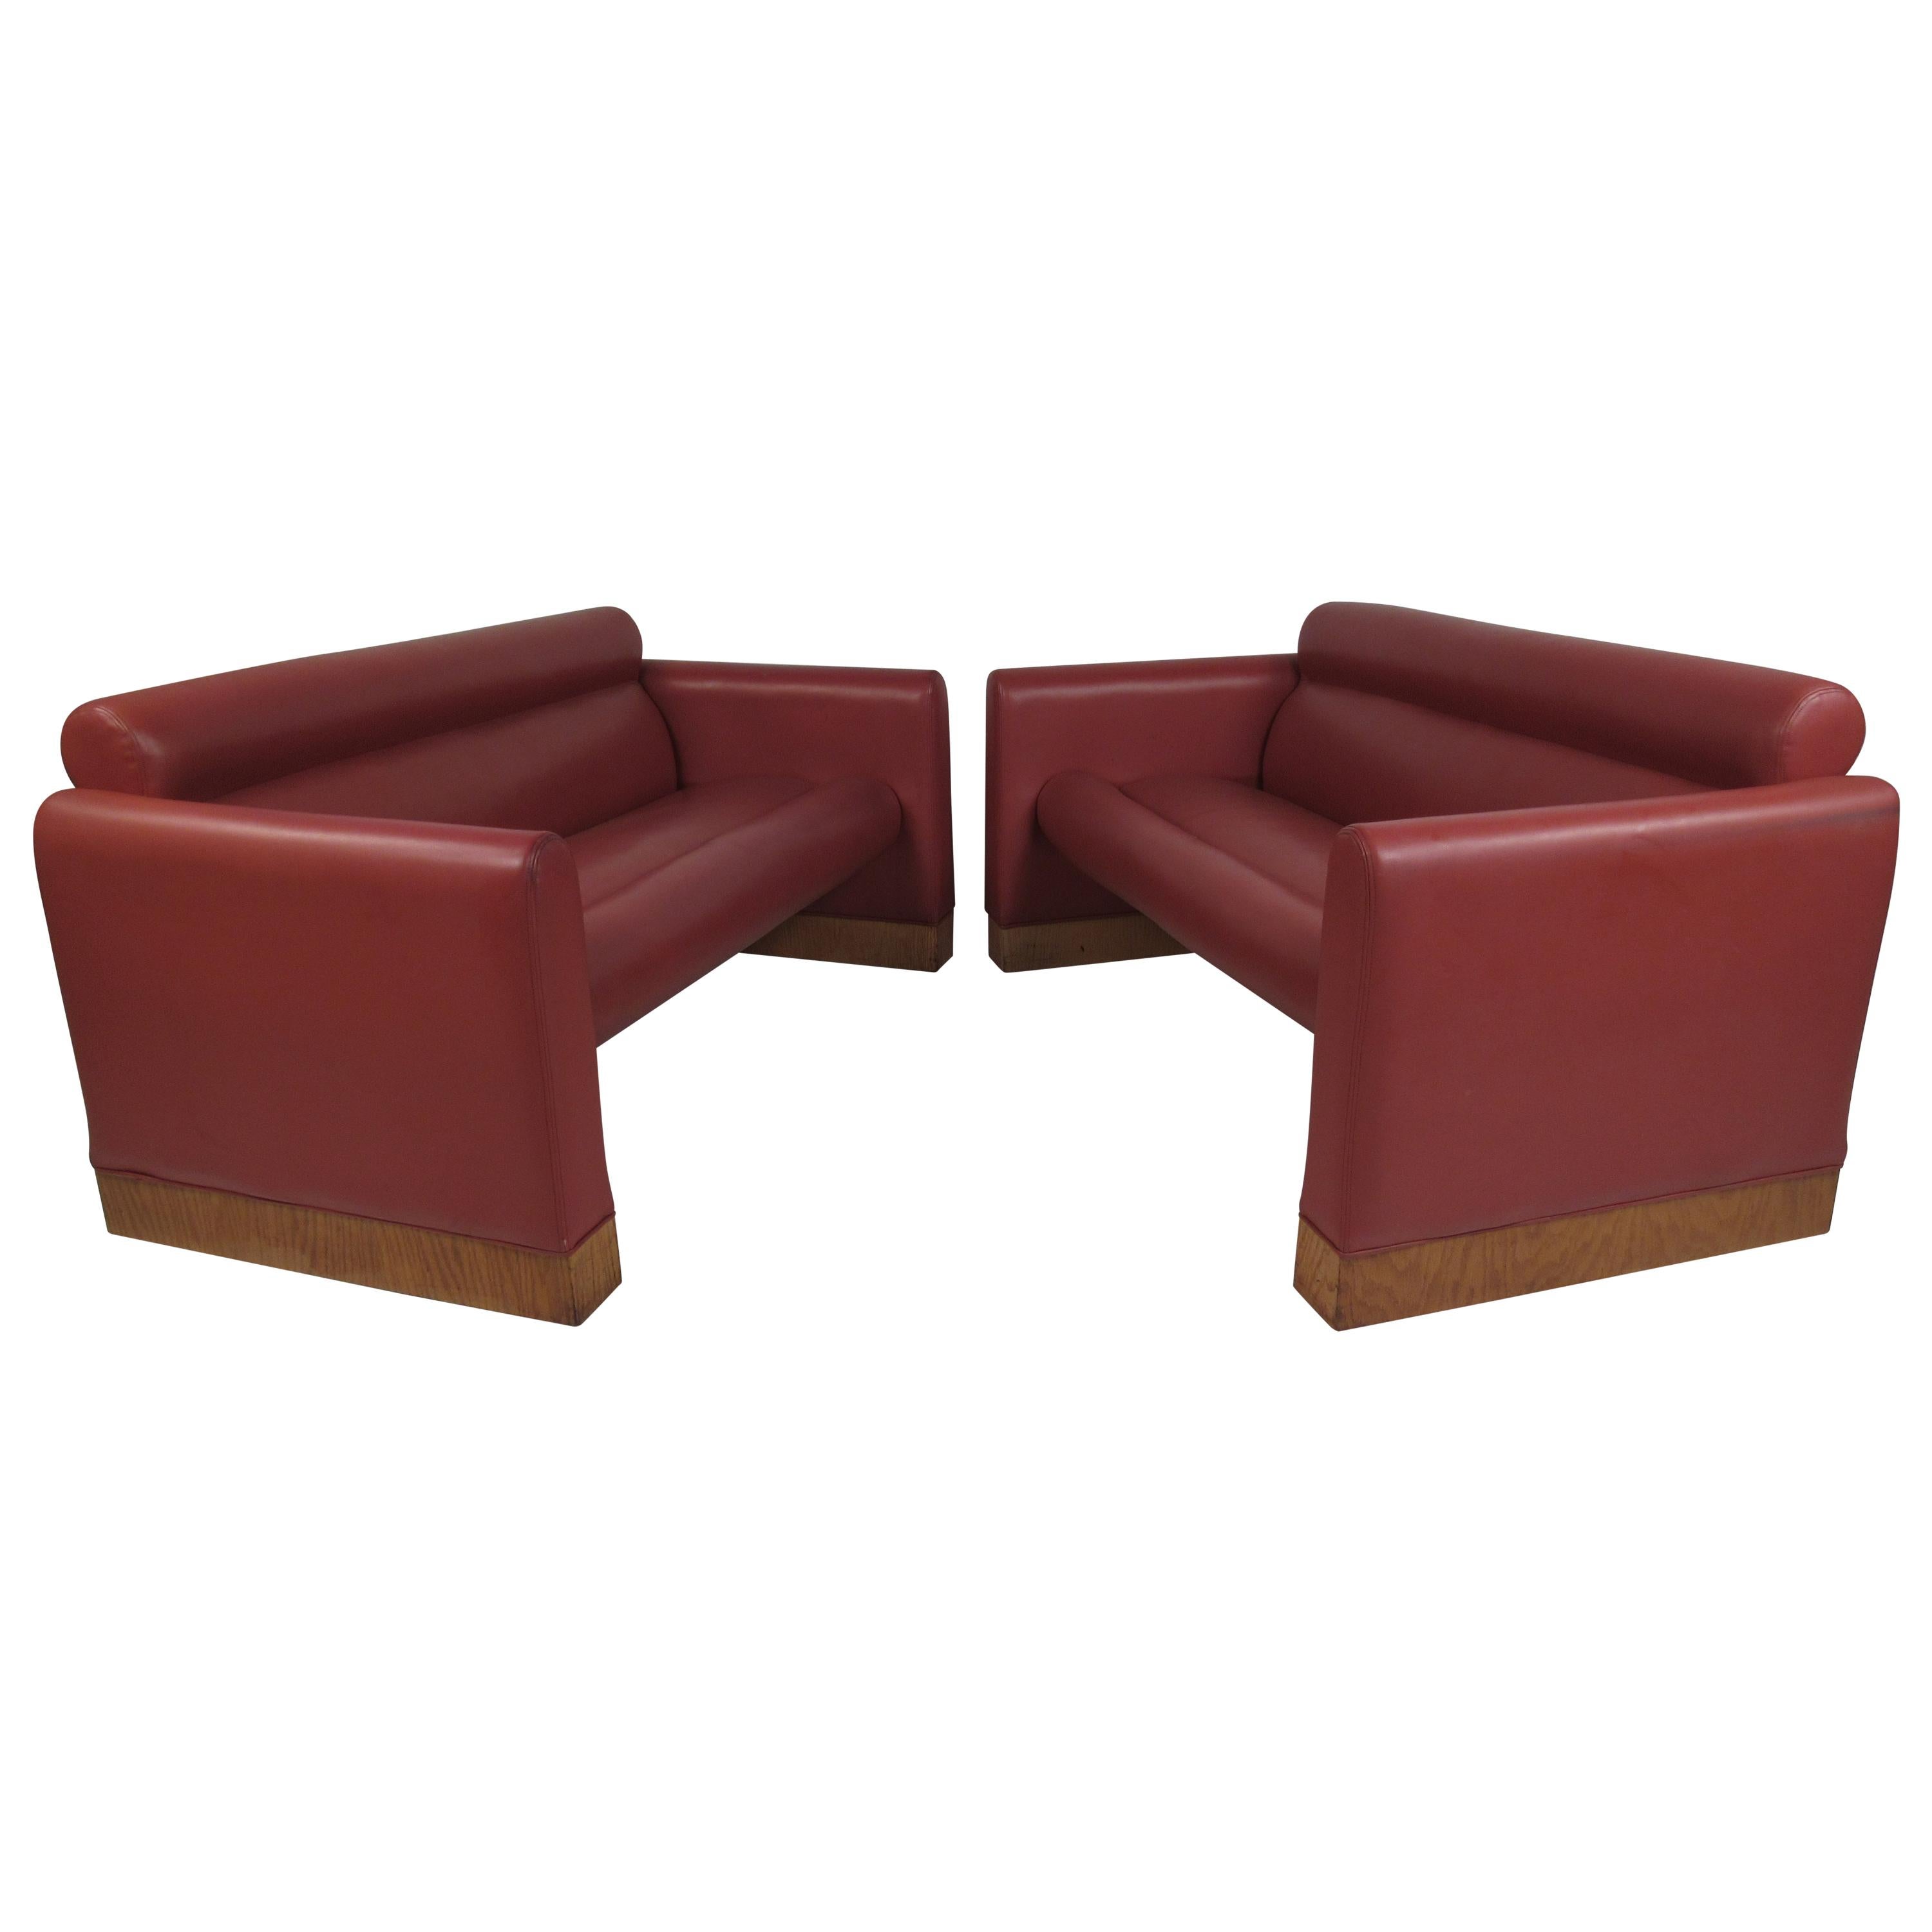 Pair of Midcentury Settee's by Charlotte Chair Company For Sale